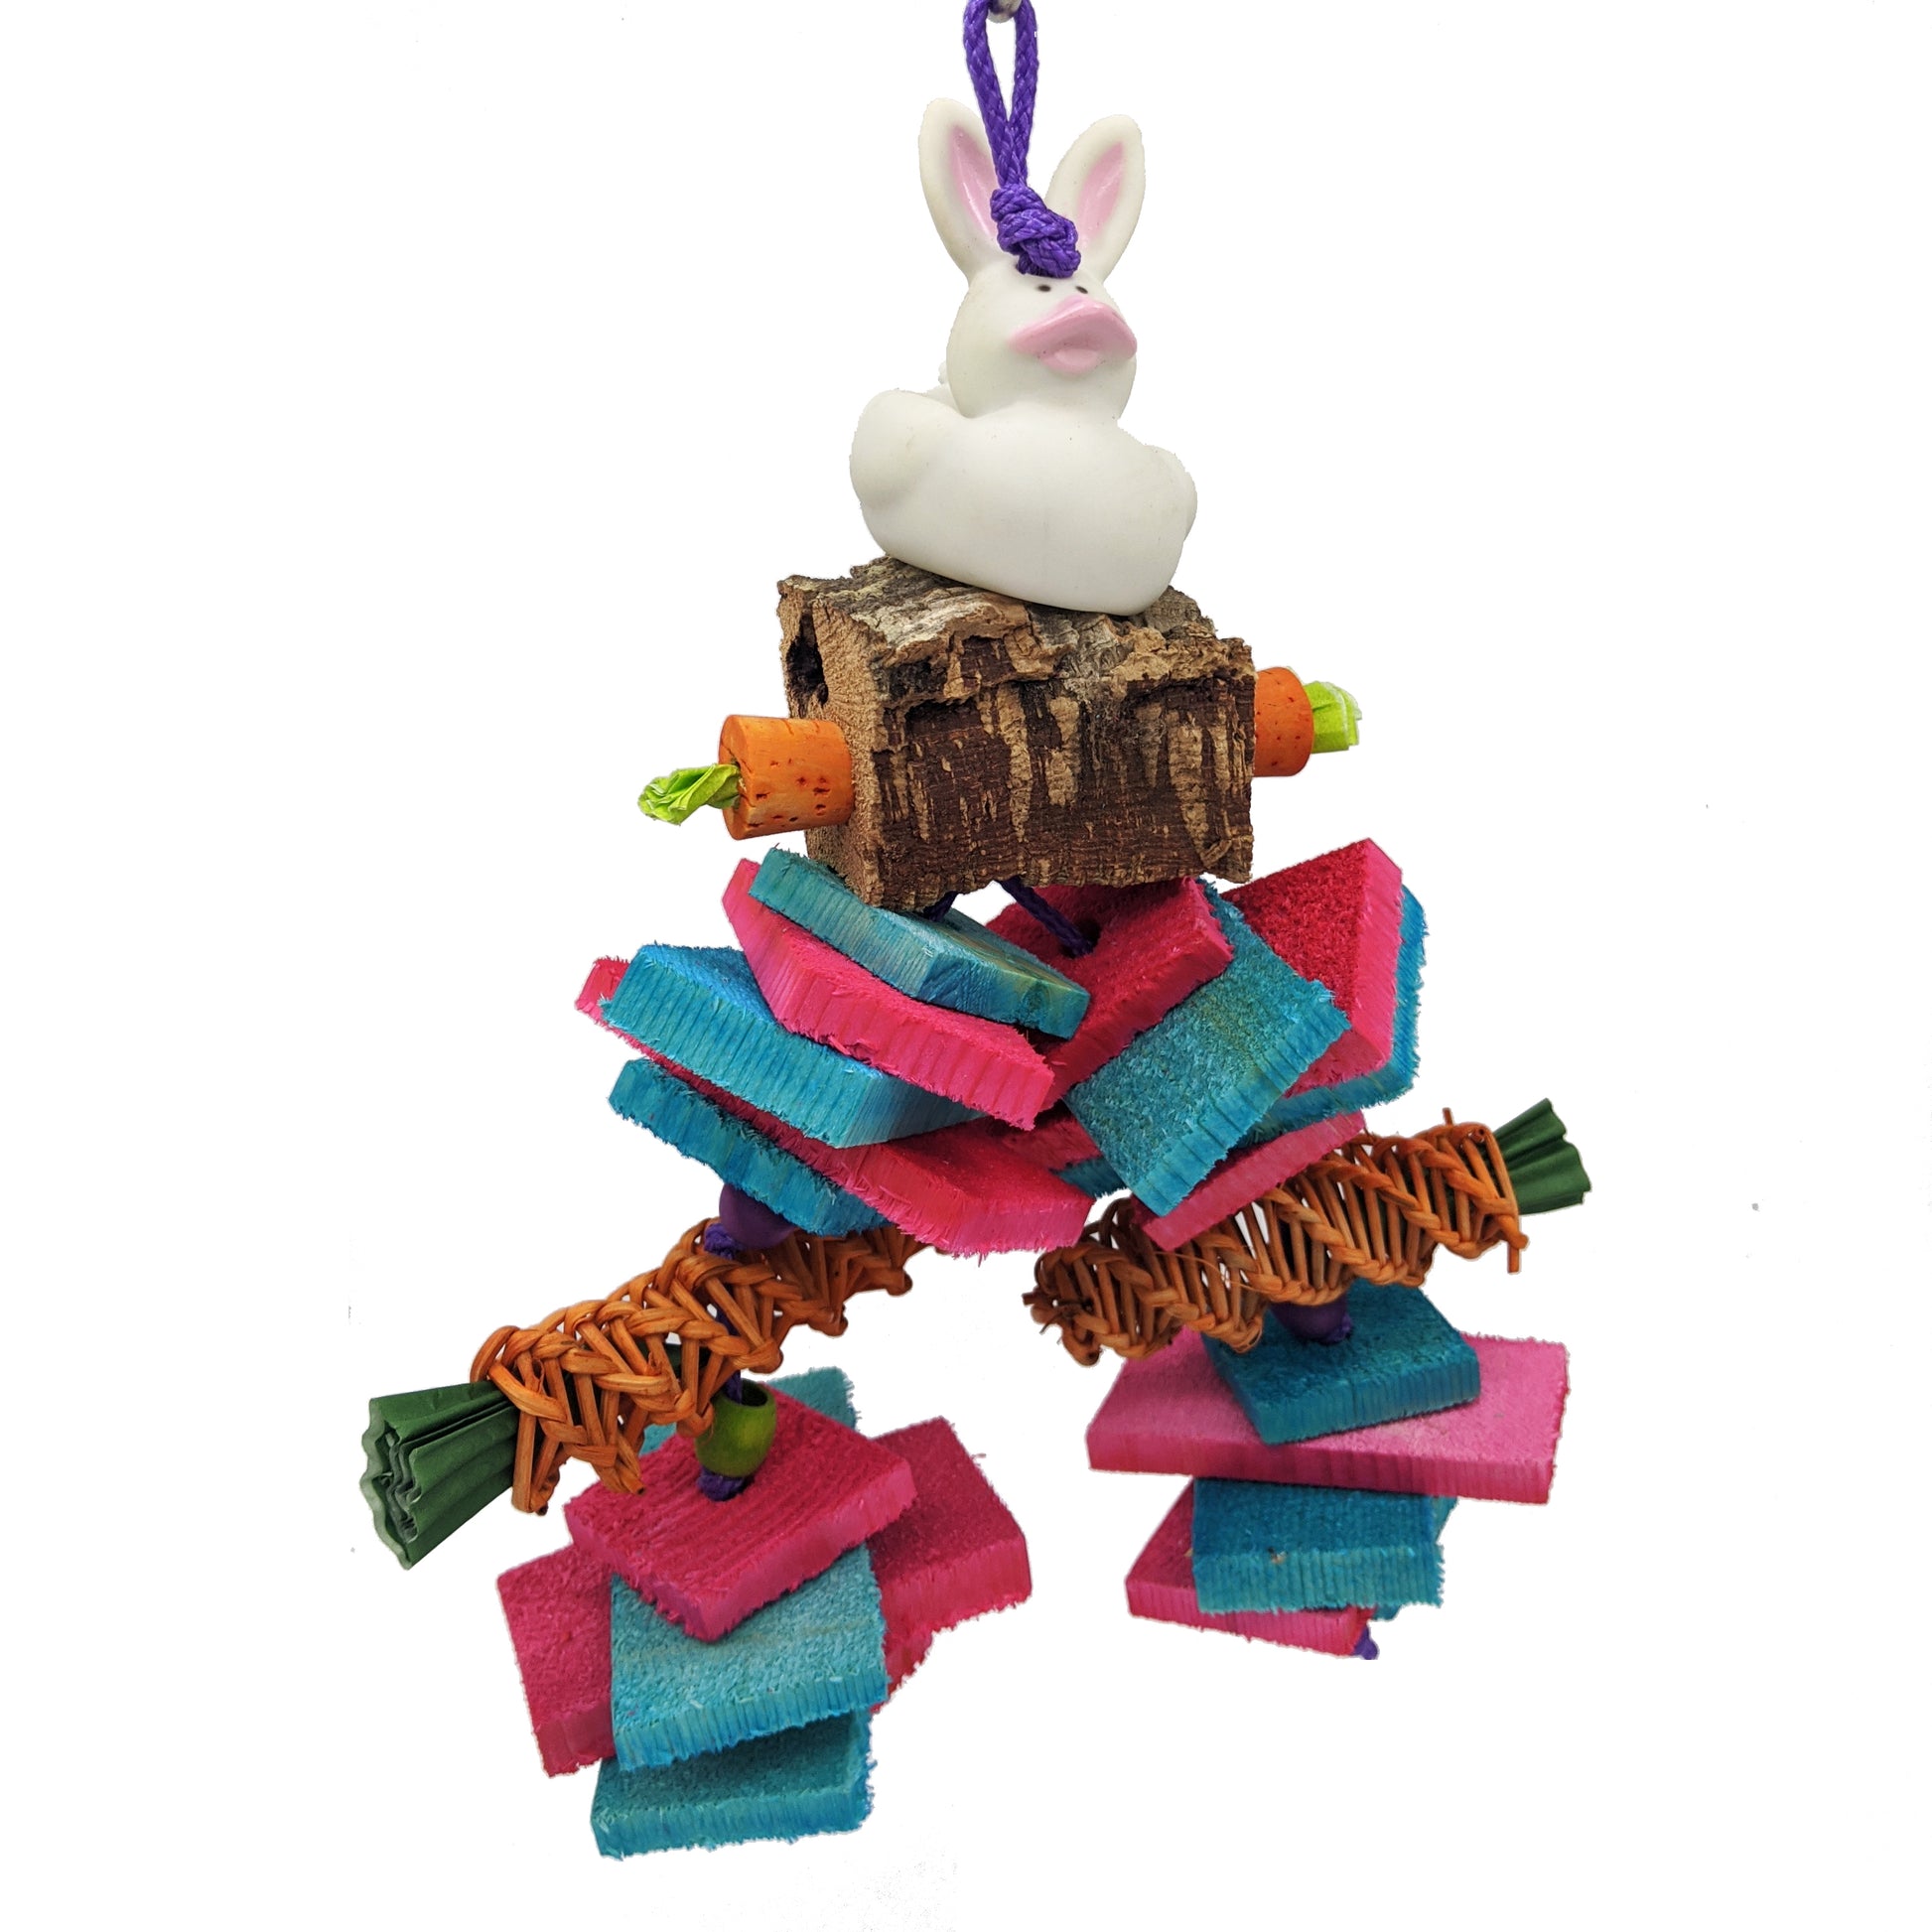 A vinyl rubber bunny sits on top of virgin cork bark, with cork stopper carrots. Includes thin and thick natural, kiln-dried pine slices and vine carrots. Great toy for small or medium birds and parrots, including conures, pionus, amazons, senegals, and more. 